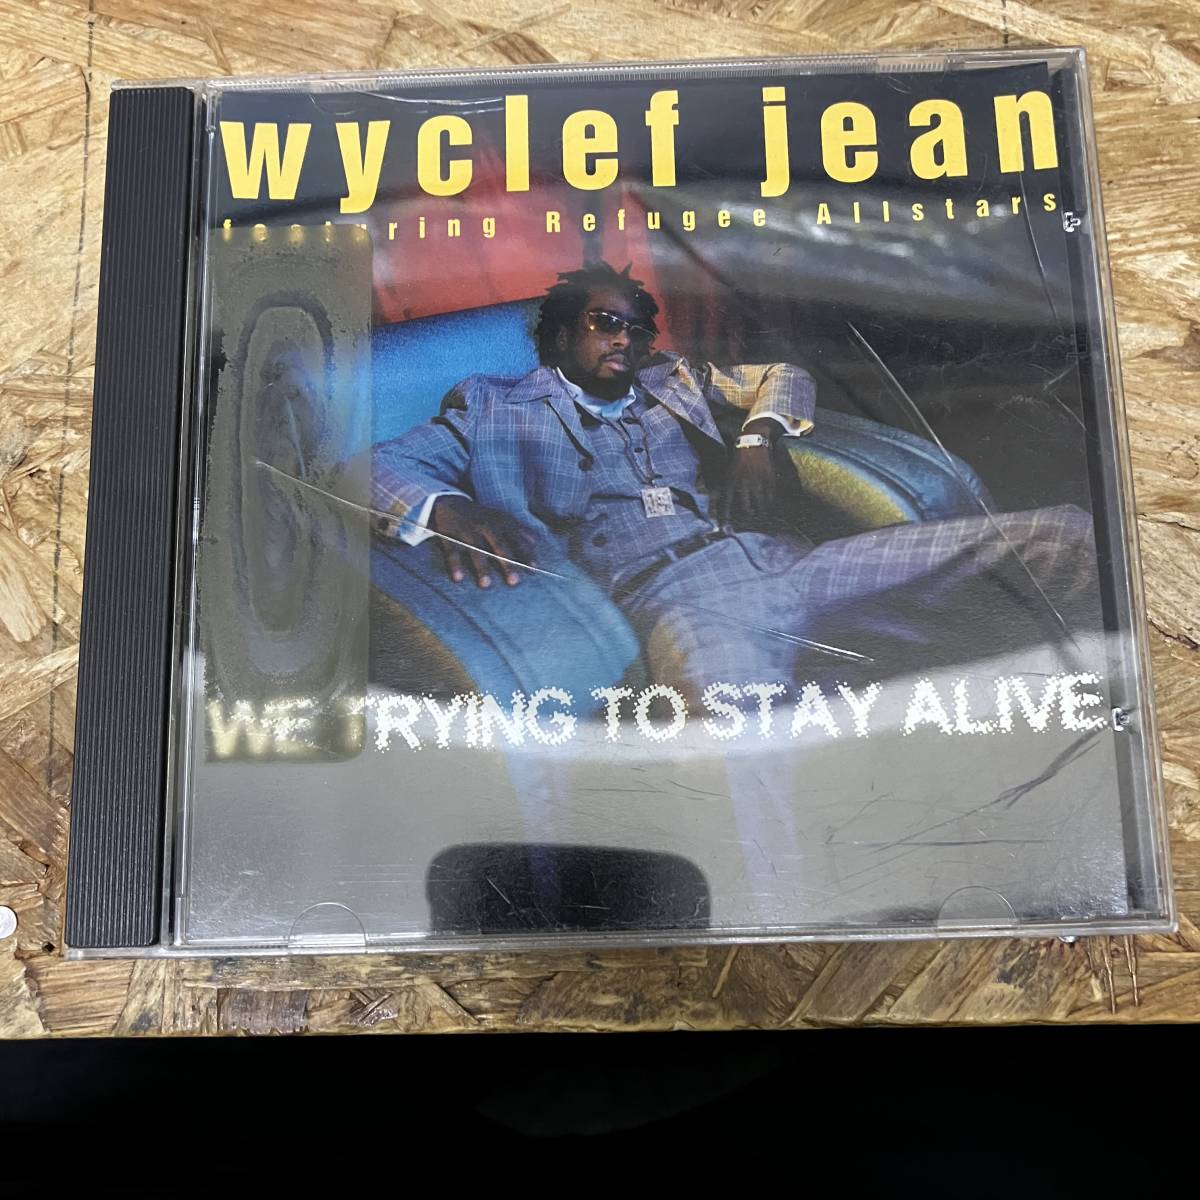 ● HIPHOP,R&B WYCLEF JEAN - WE TRYING TO STAY ALIVE シングル,名曲! CD 中古品_画像1